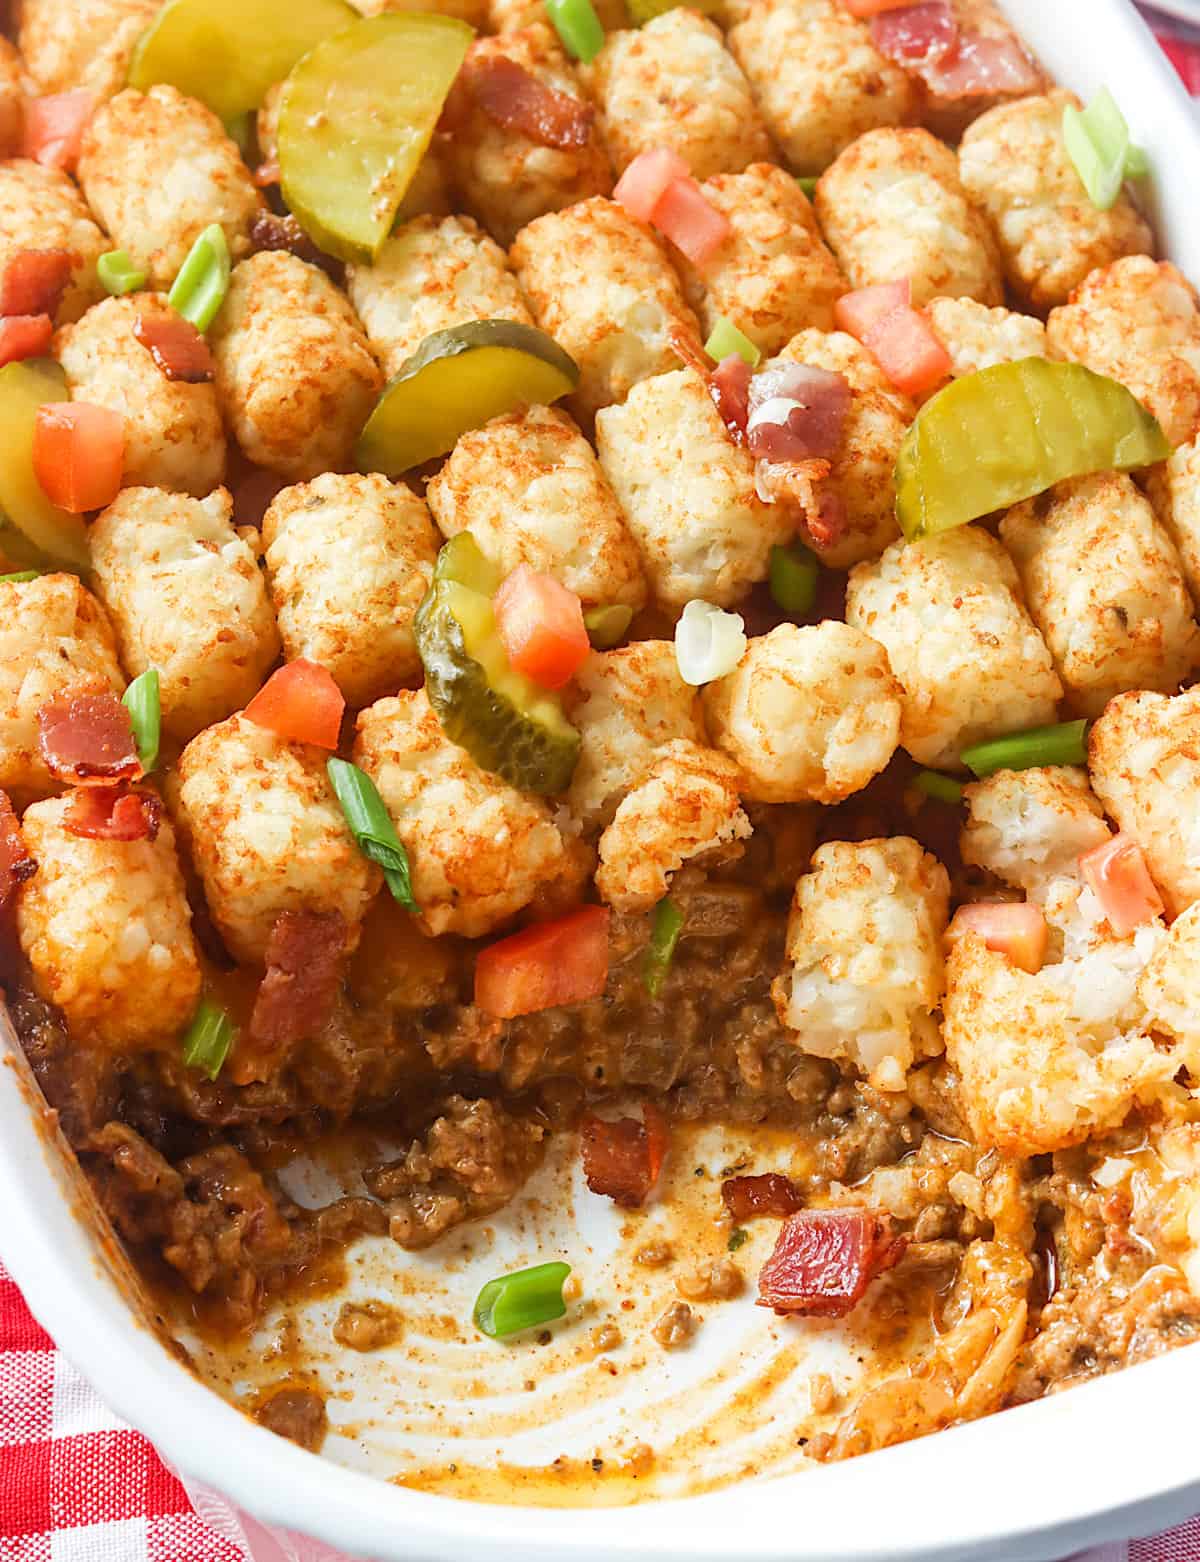 Watching this amazing cheeseburger tater tot casserole disappear with happy smiles